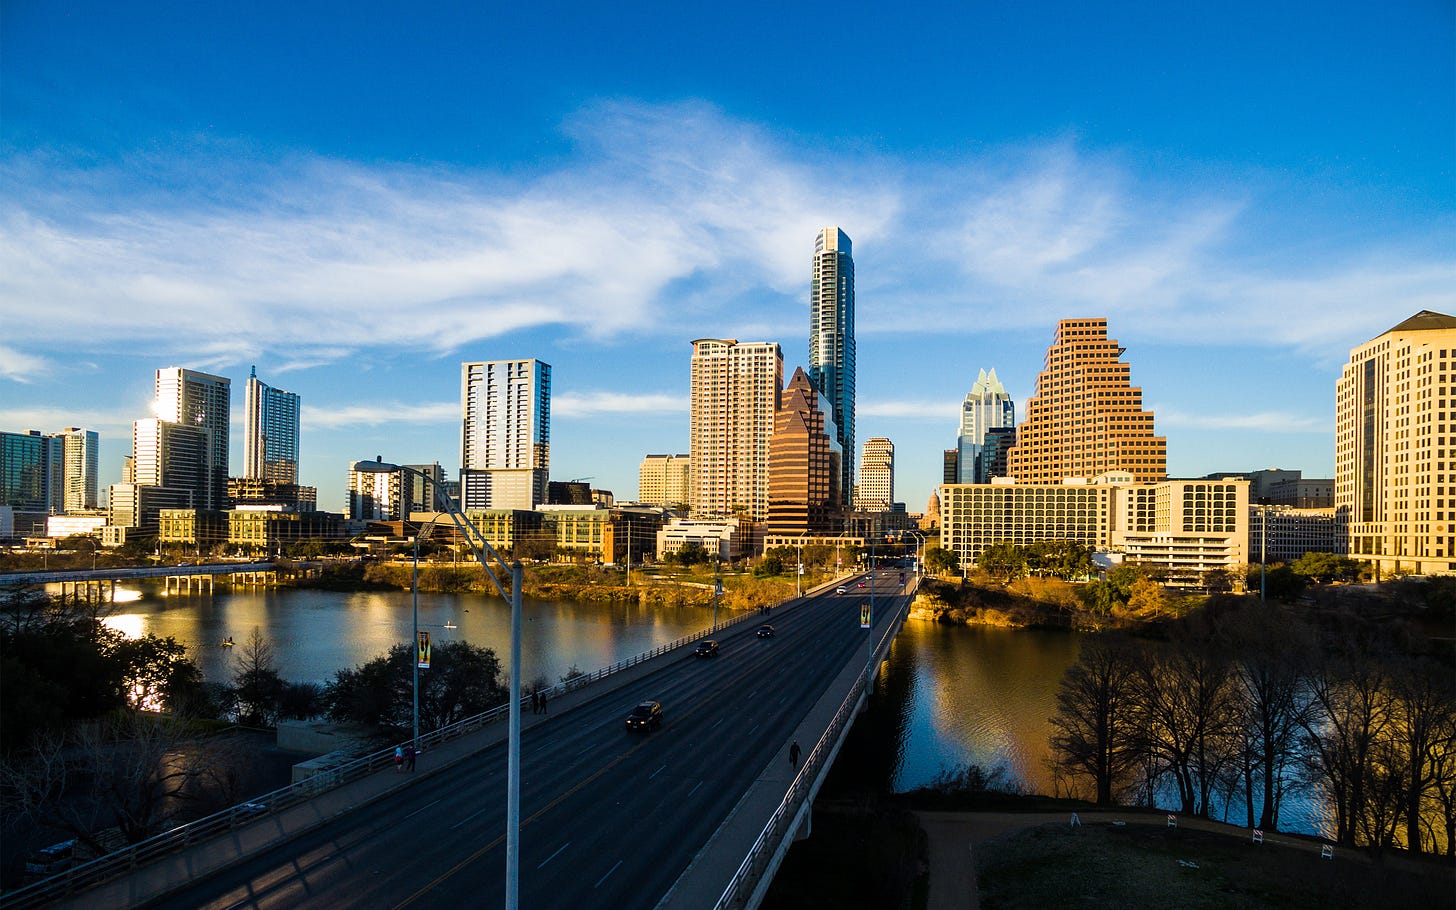 SXSW Conference 2018: Highlights Roundup from Austin